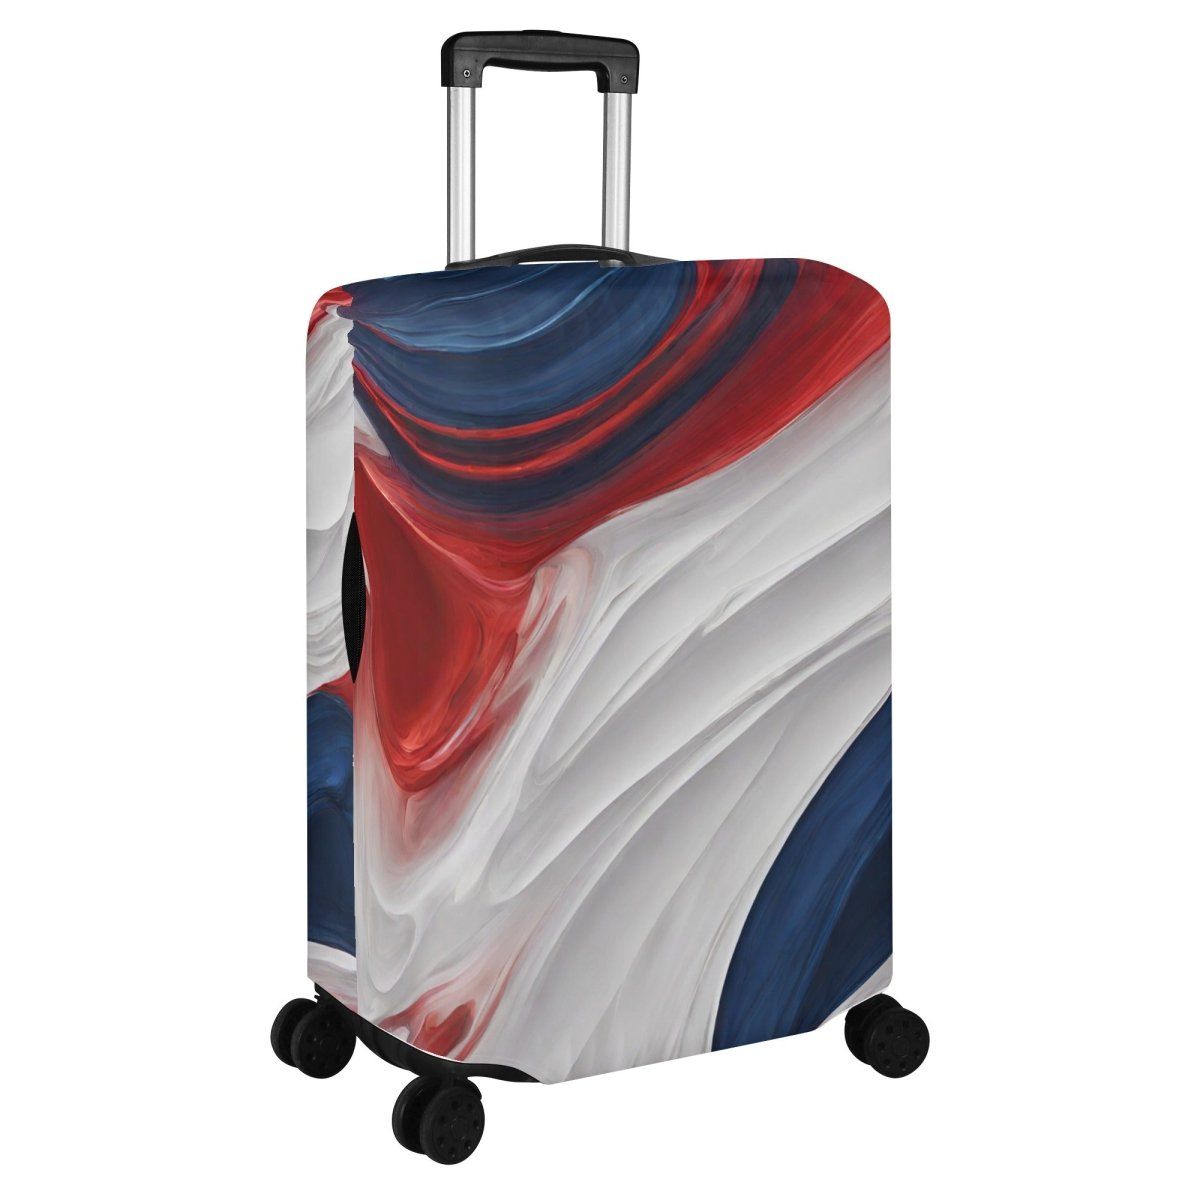 Red White Blue Luggage Cover - Protect Your Suitcase in Patriotic Style - Iron Phoenix GHG